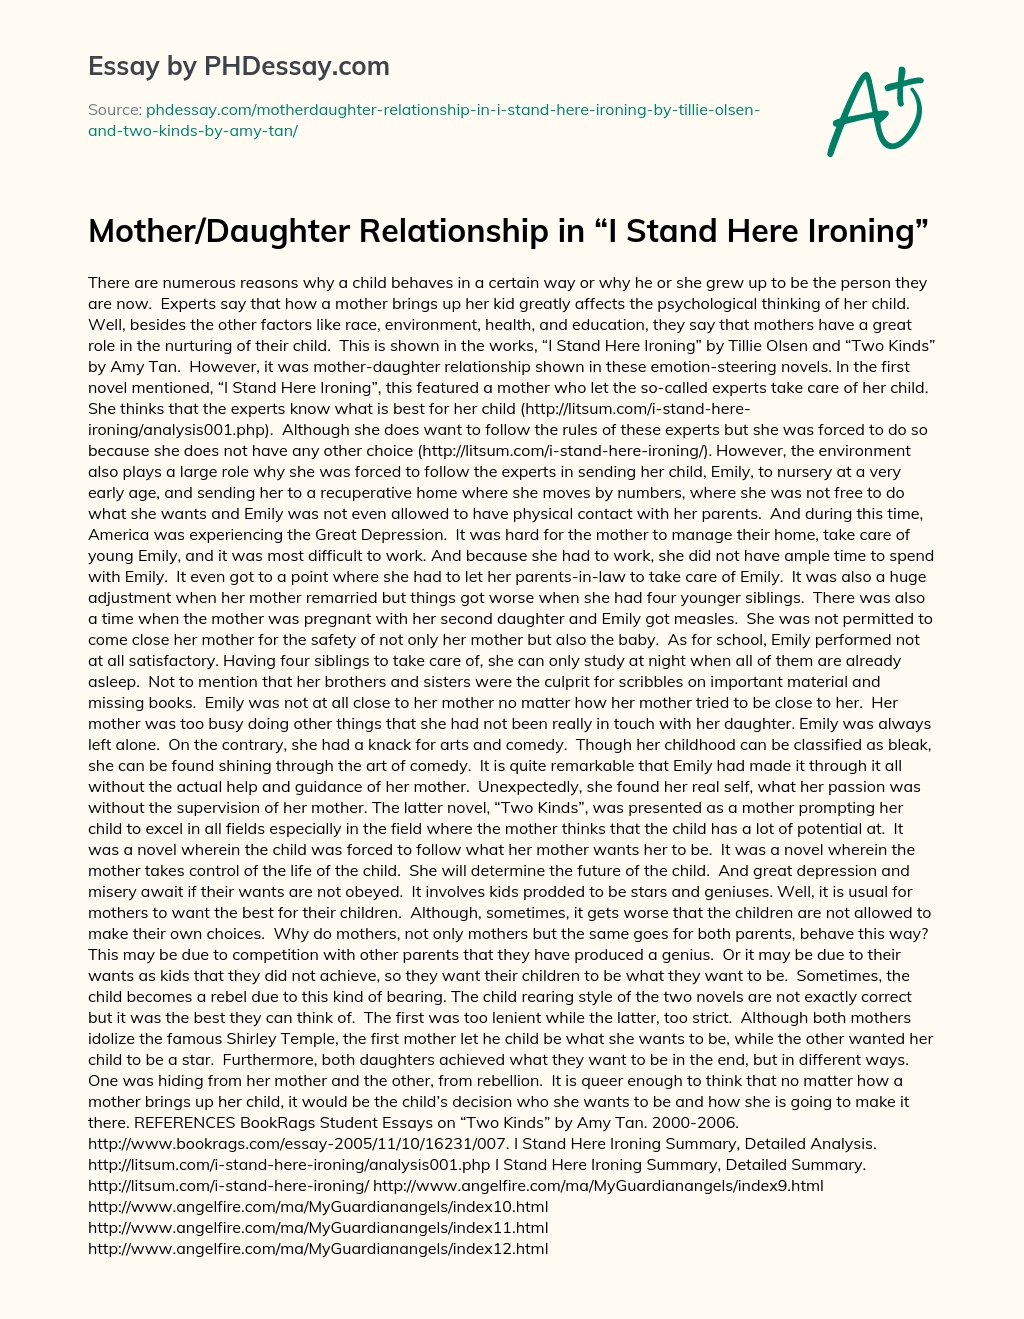 Mother/Daughter Relationship in “I Stand Here Ironing” essay